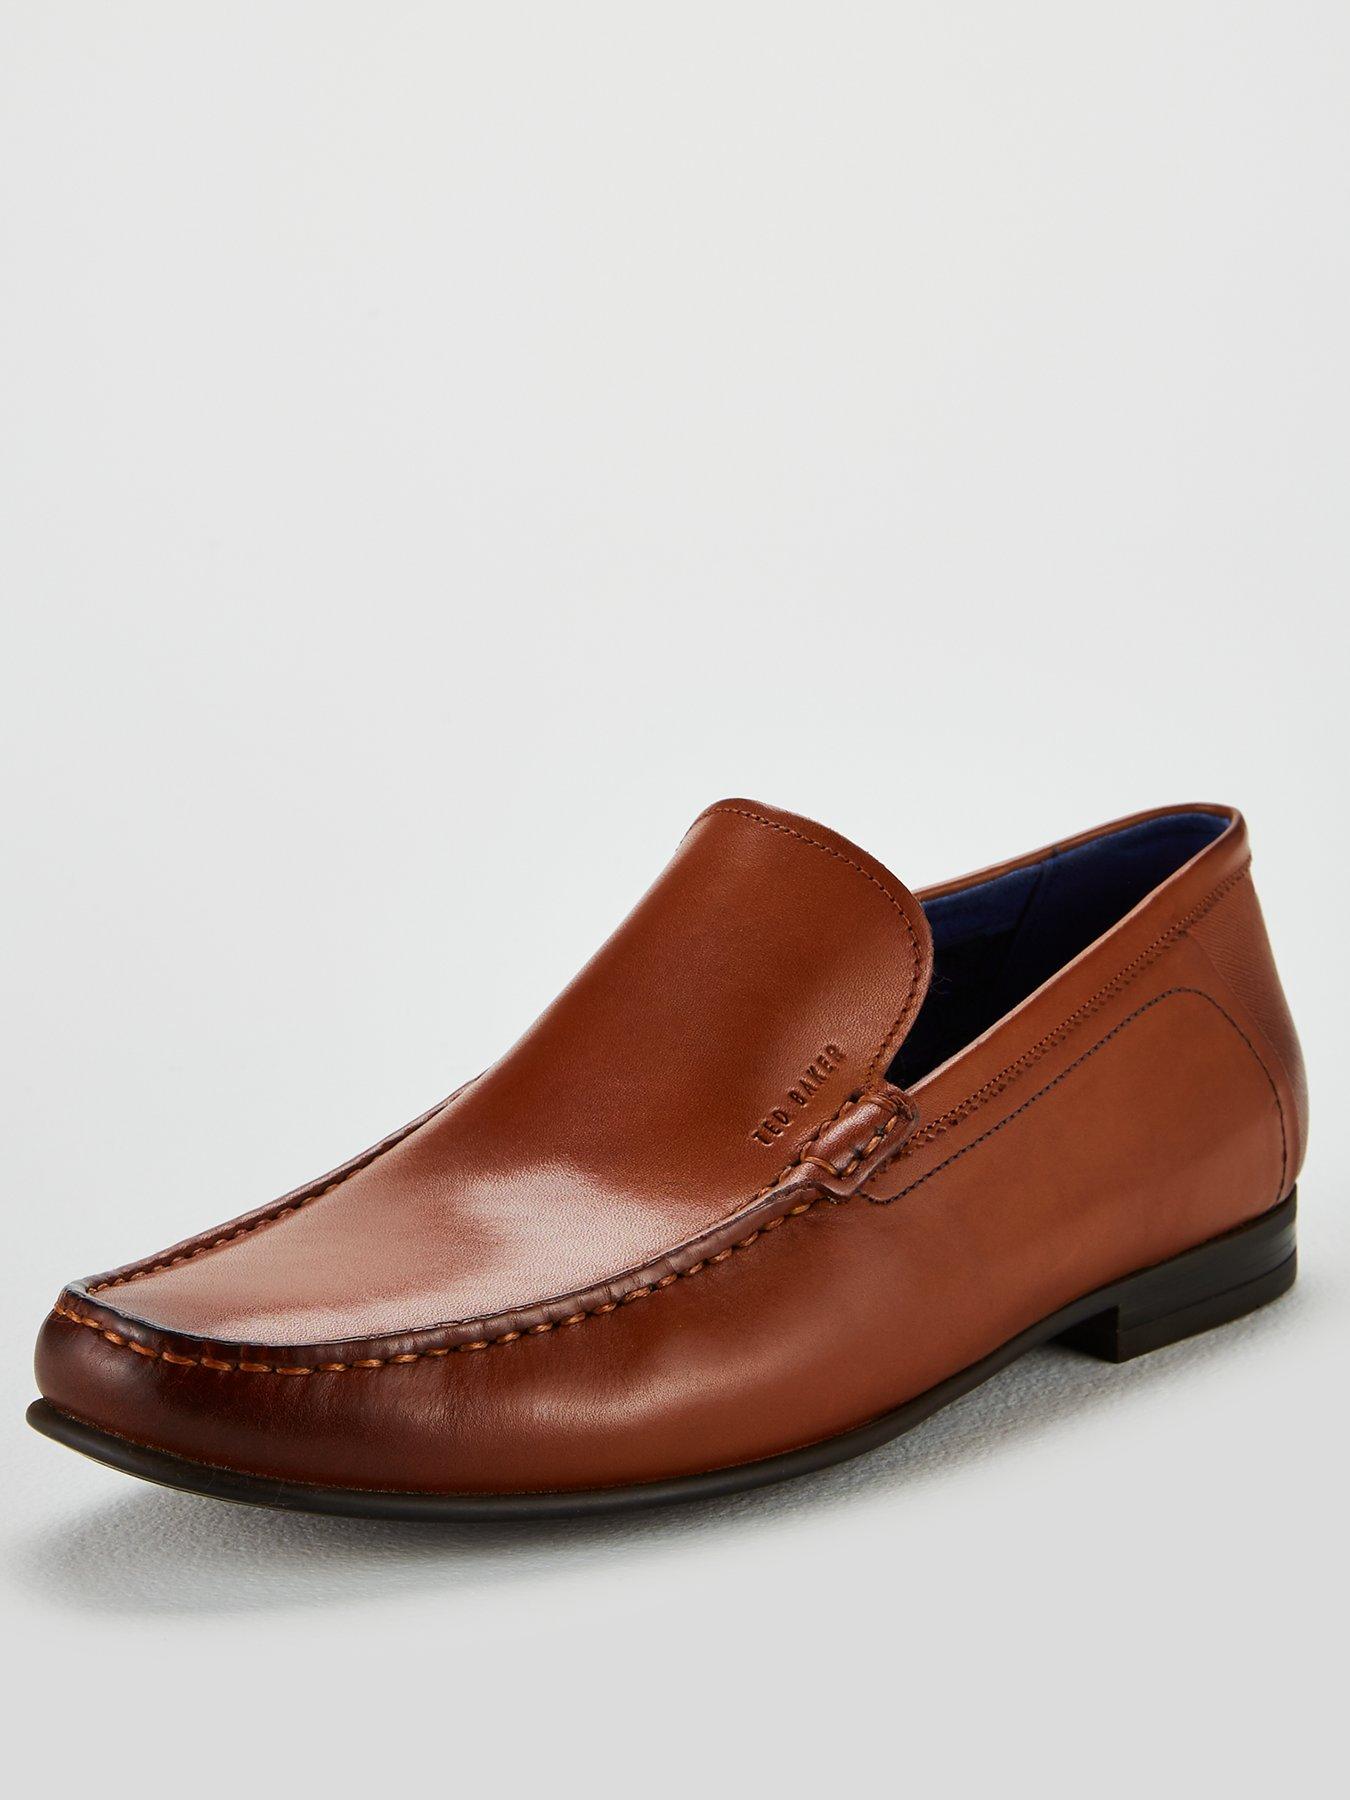 ted baker mens shoes clearance